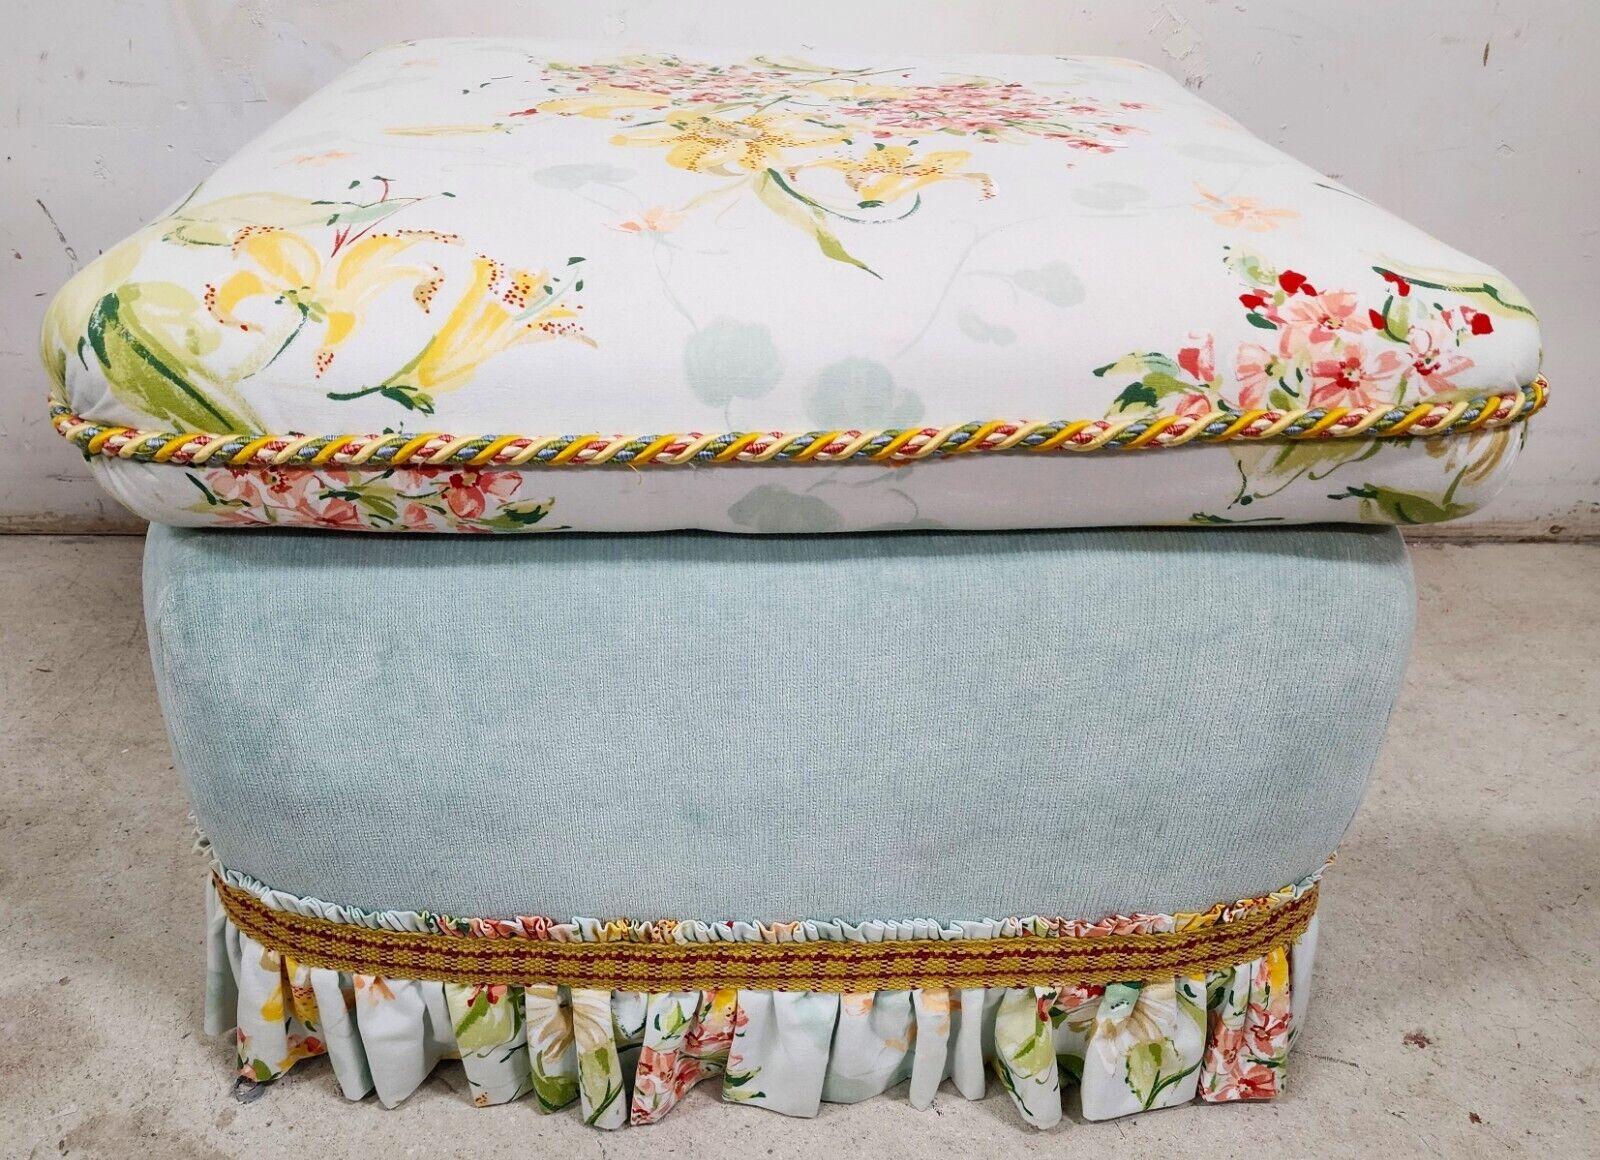 For FULL item description click on CONTINUE READING at the bottom of this page.

Offering One Of Our Recent Palm Beach Estate Fine Furniture Acquisitions Of A
Shabby Chic Designer Cottage Rolling Ottoman Pouf
It rolls very easily on metal